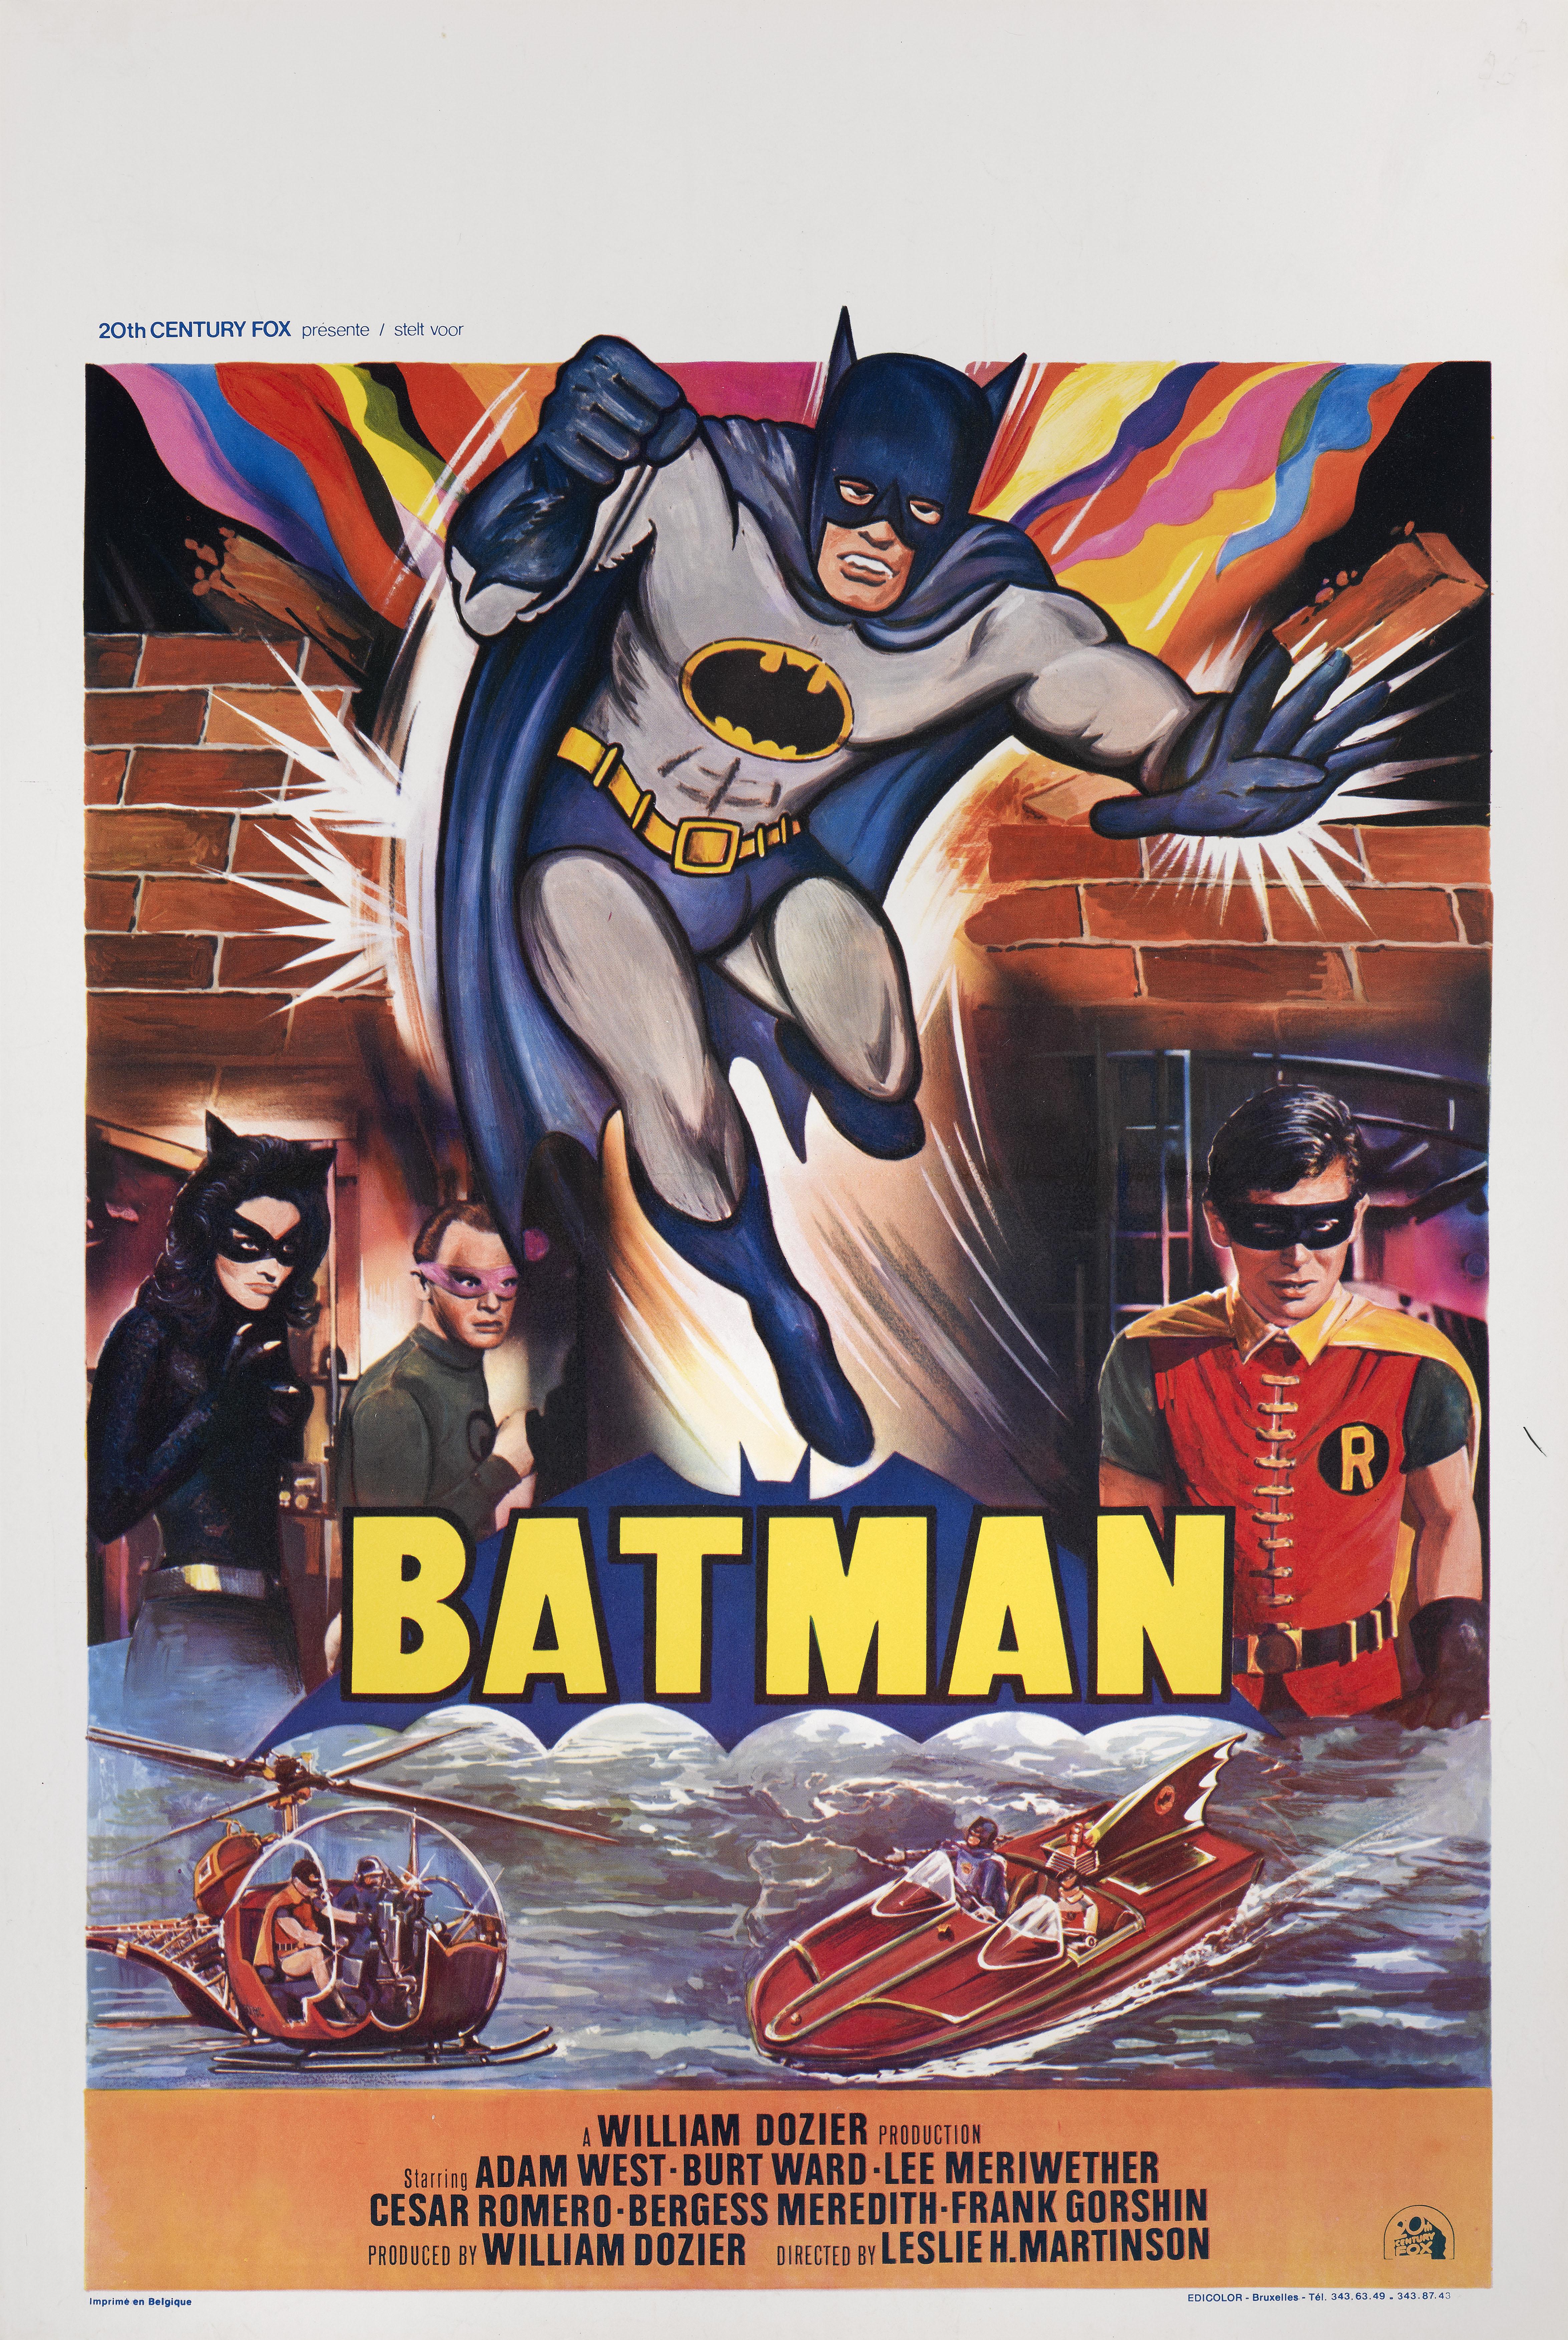 Original Belgian film poster for Leslie Martinson's 1966 Batman staring Adam West as Batman and Burt Ward as Robin.
This poster is paper backed and would be shipped flat by Federal Express.